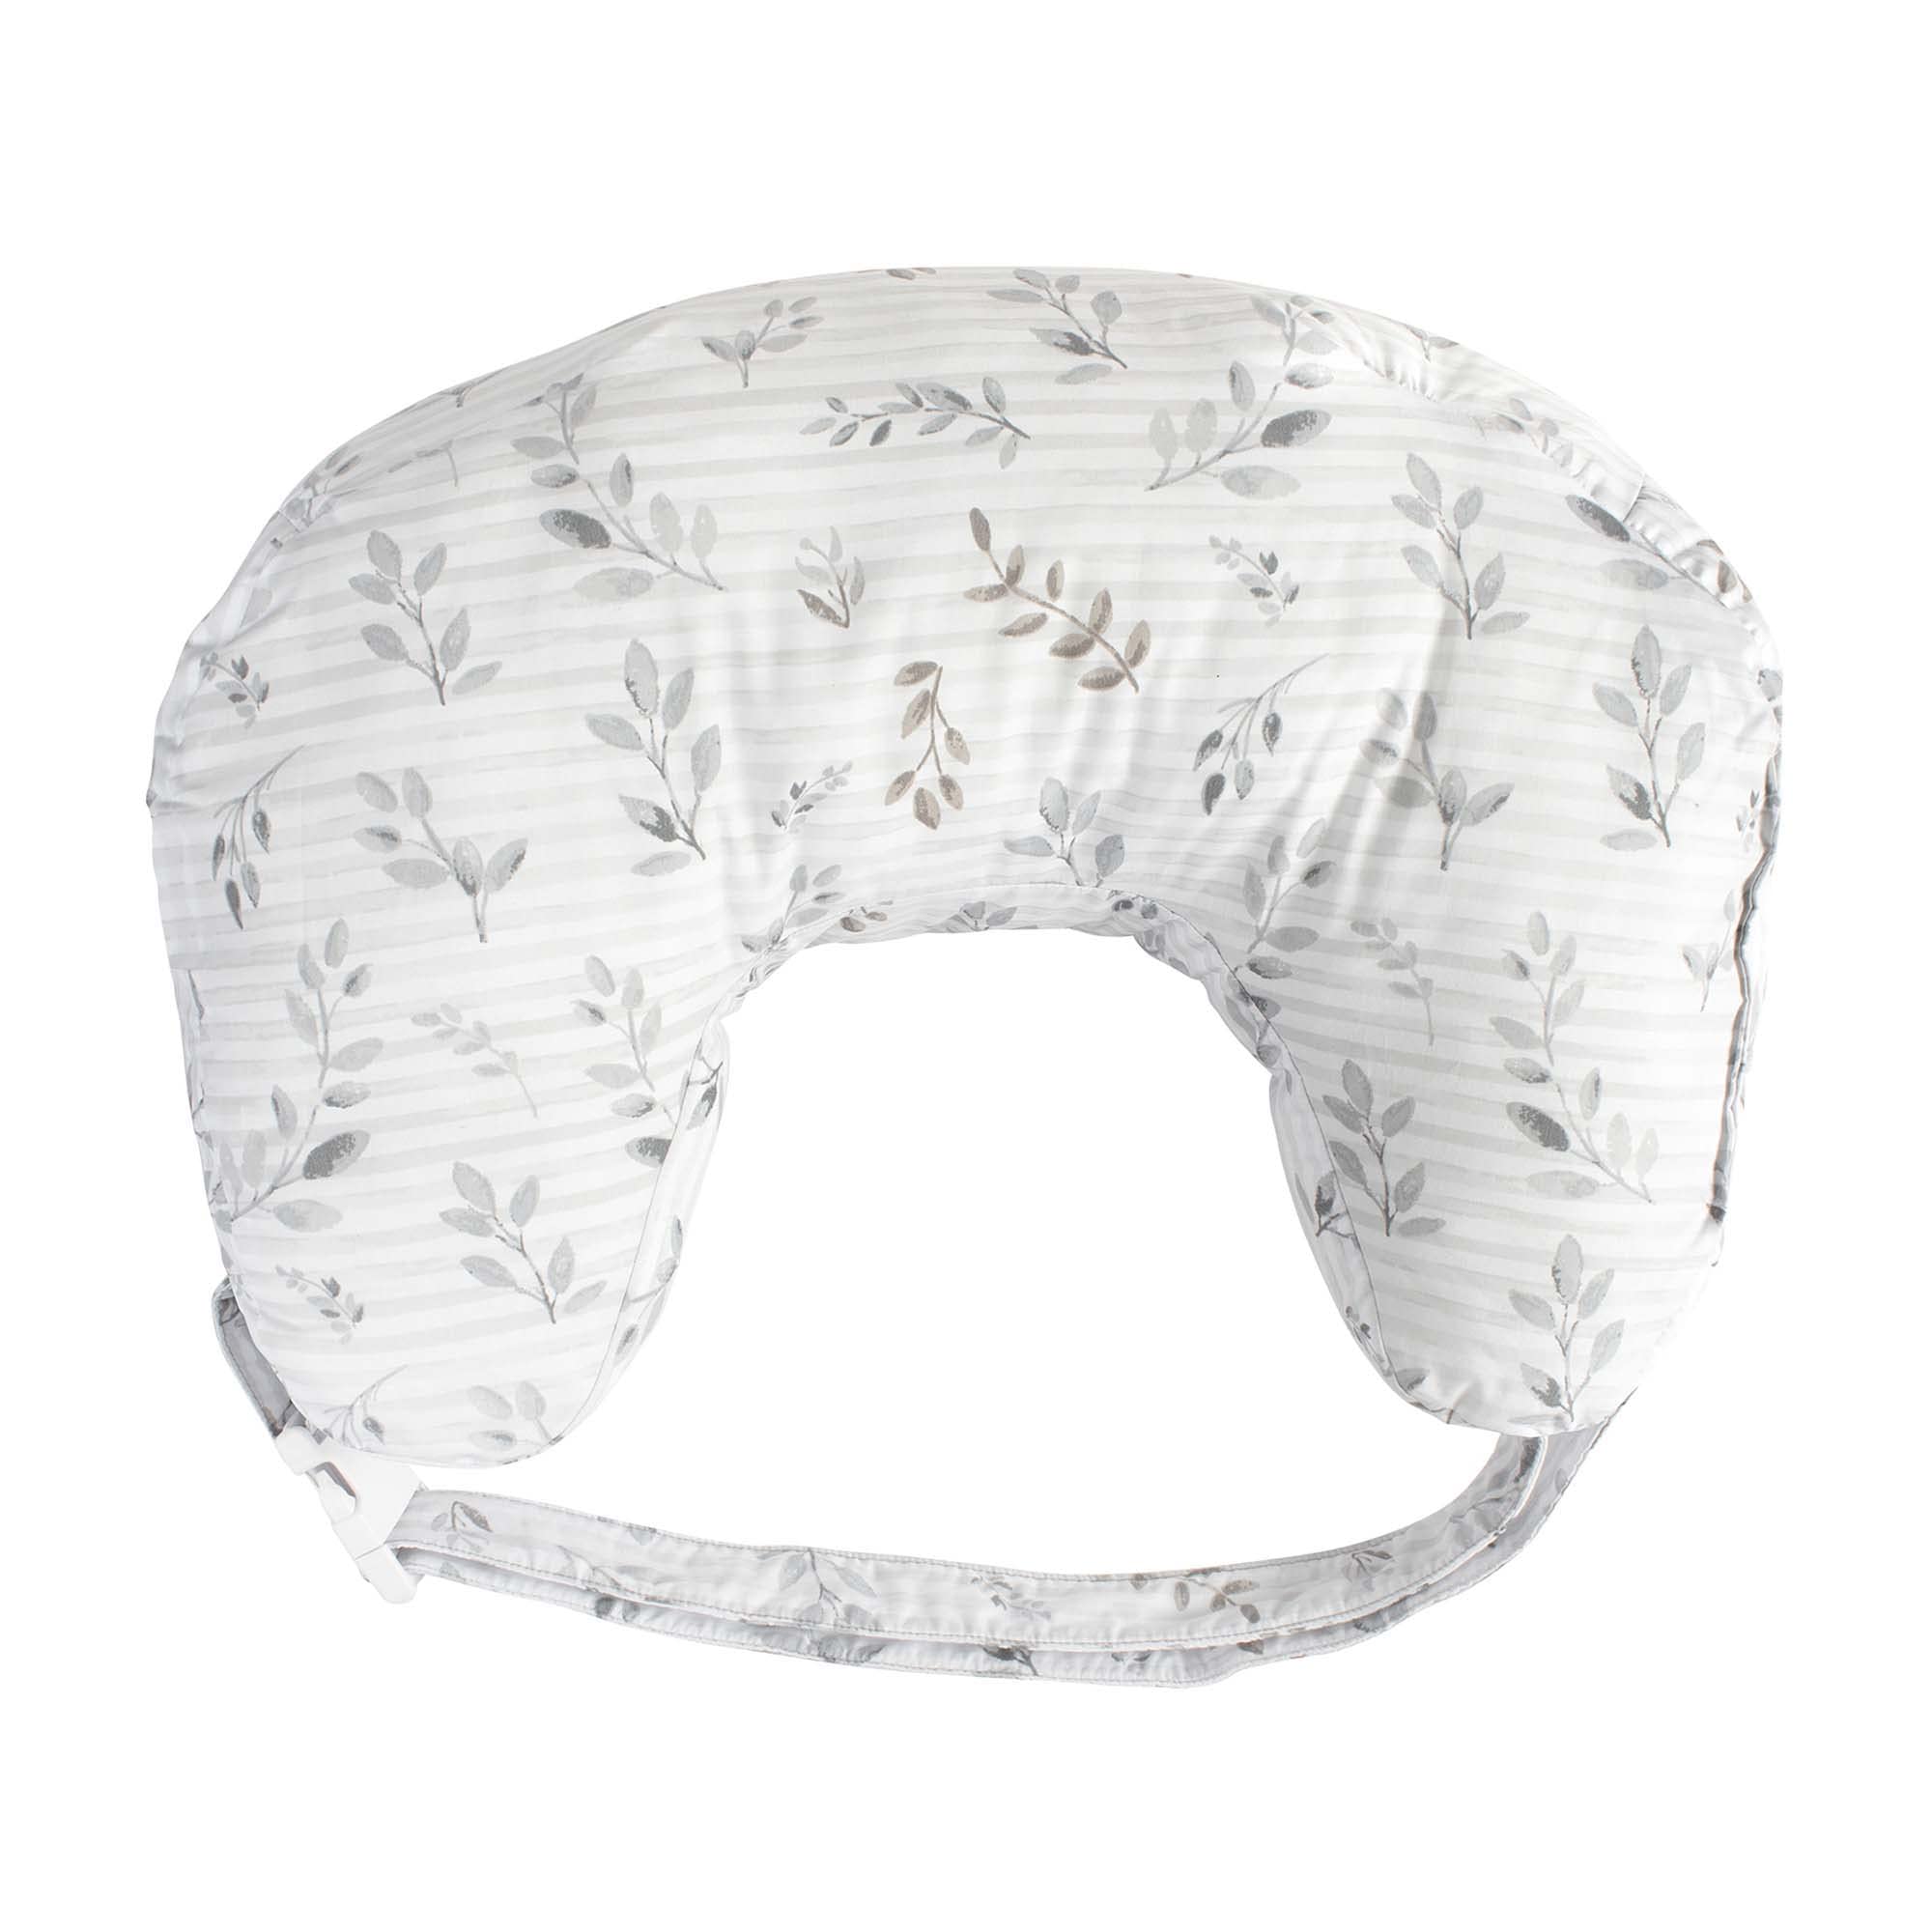 Boppy Best Latch Nursing Pillow, Gray Pennydot Leaf Stripe, Lactation Consultant Created, Firm Contoured and Plush Sides for Breastfeeding Options, Padded Belt, Plus Sized to Petite, Machine Washable